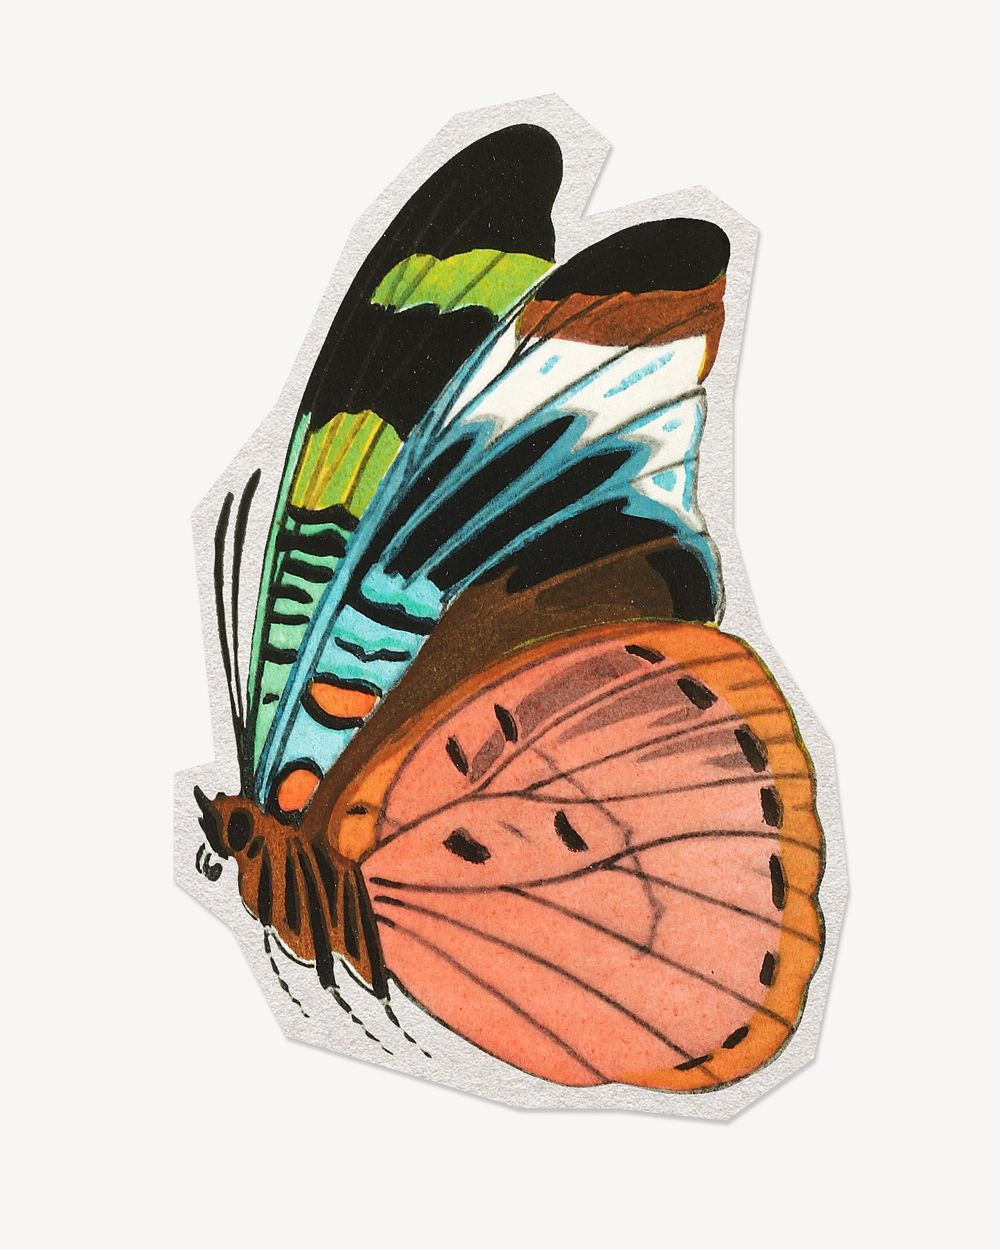 E.A. S&eacute;guy's butterfly, exotic insect on paper cut design. Remixed by rawpixel.